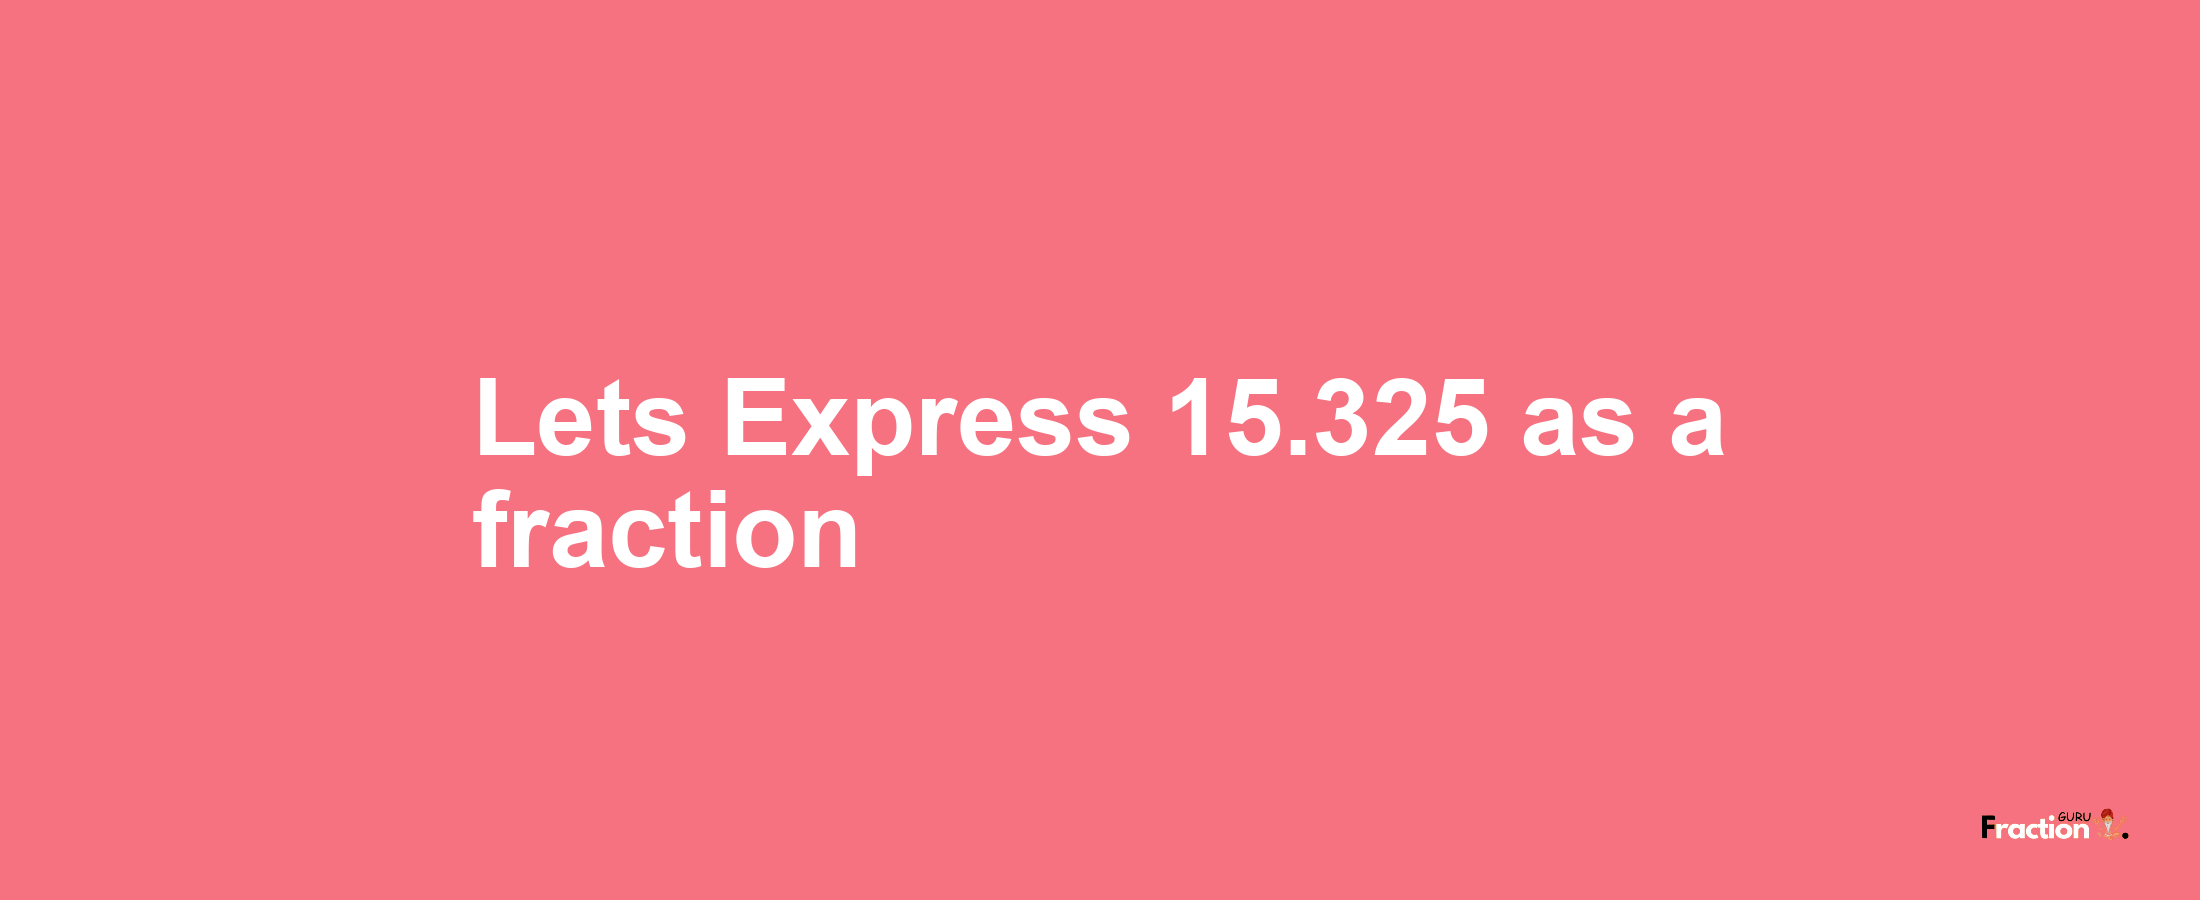 Lets Express 15.325 as afraction